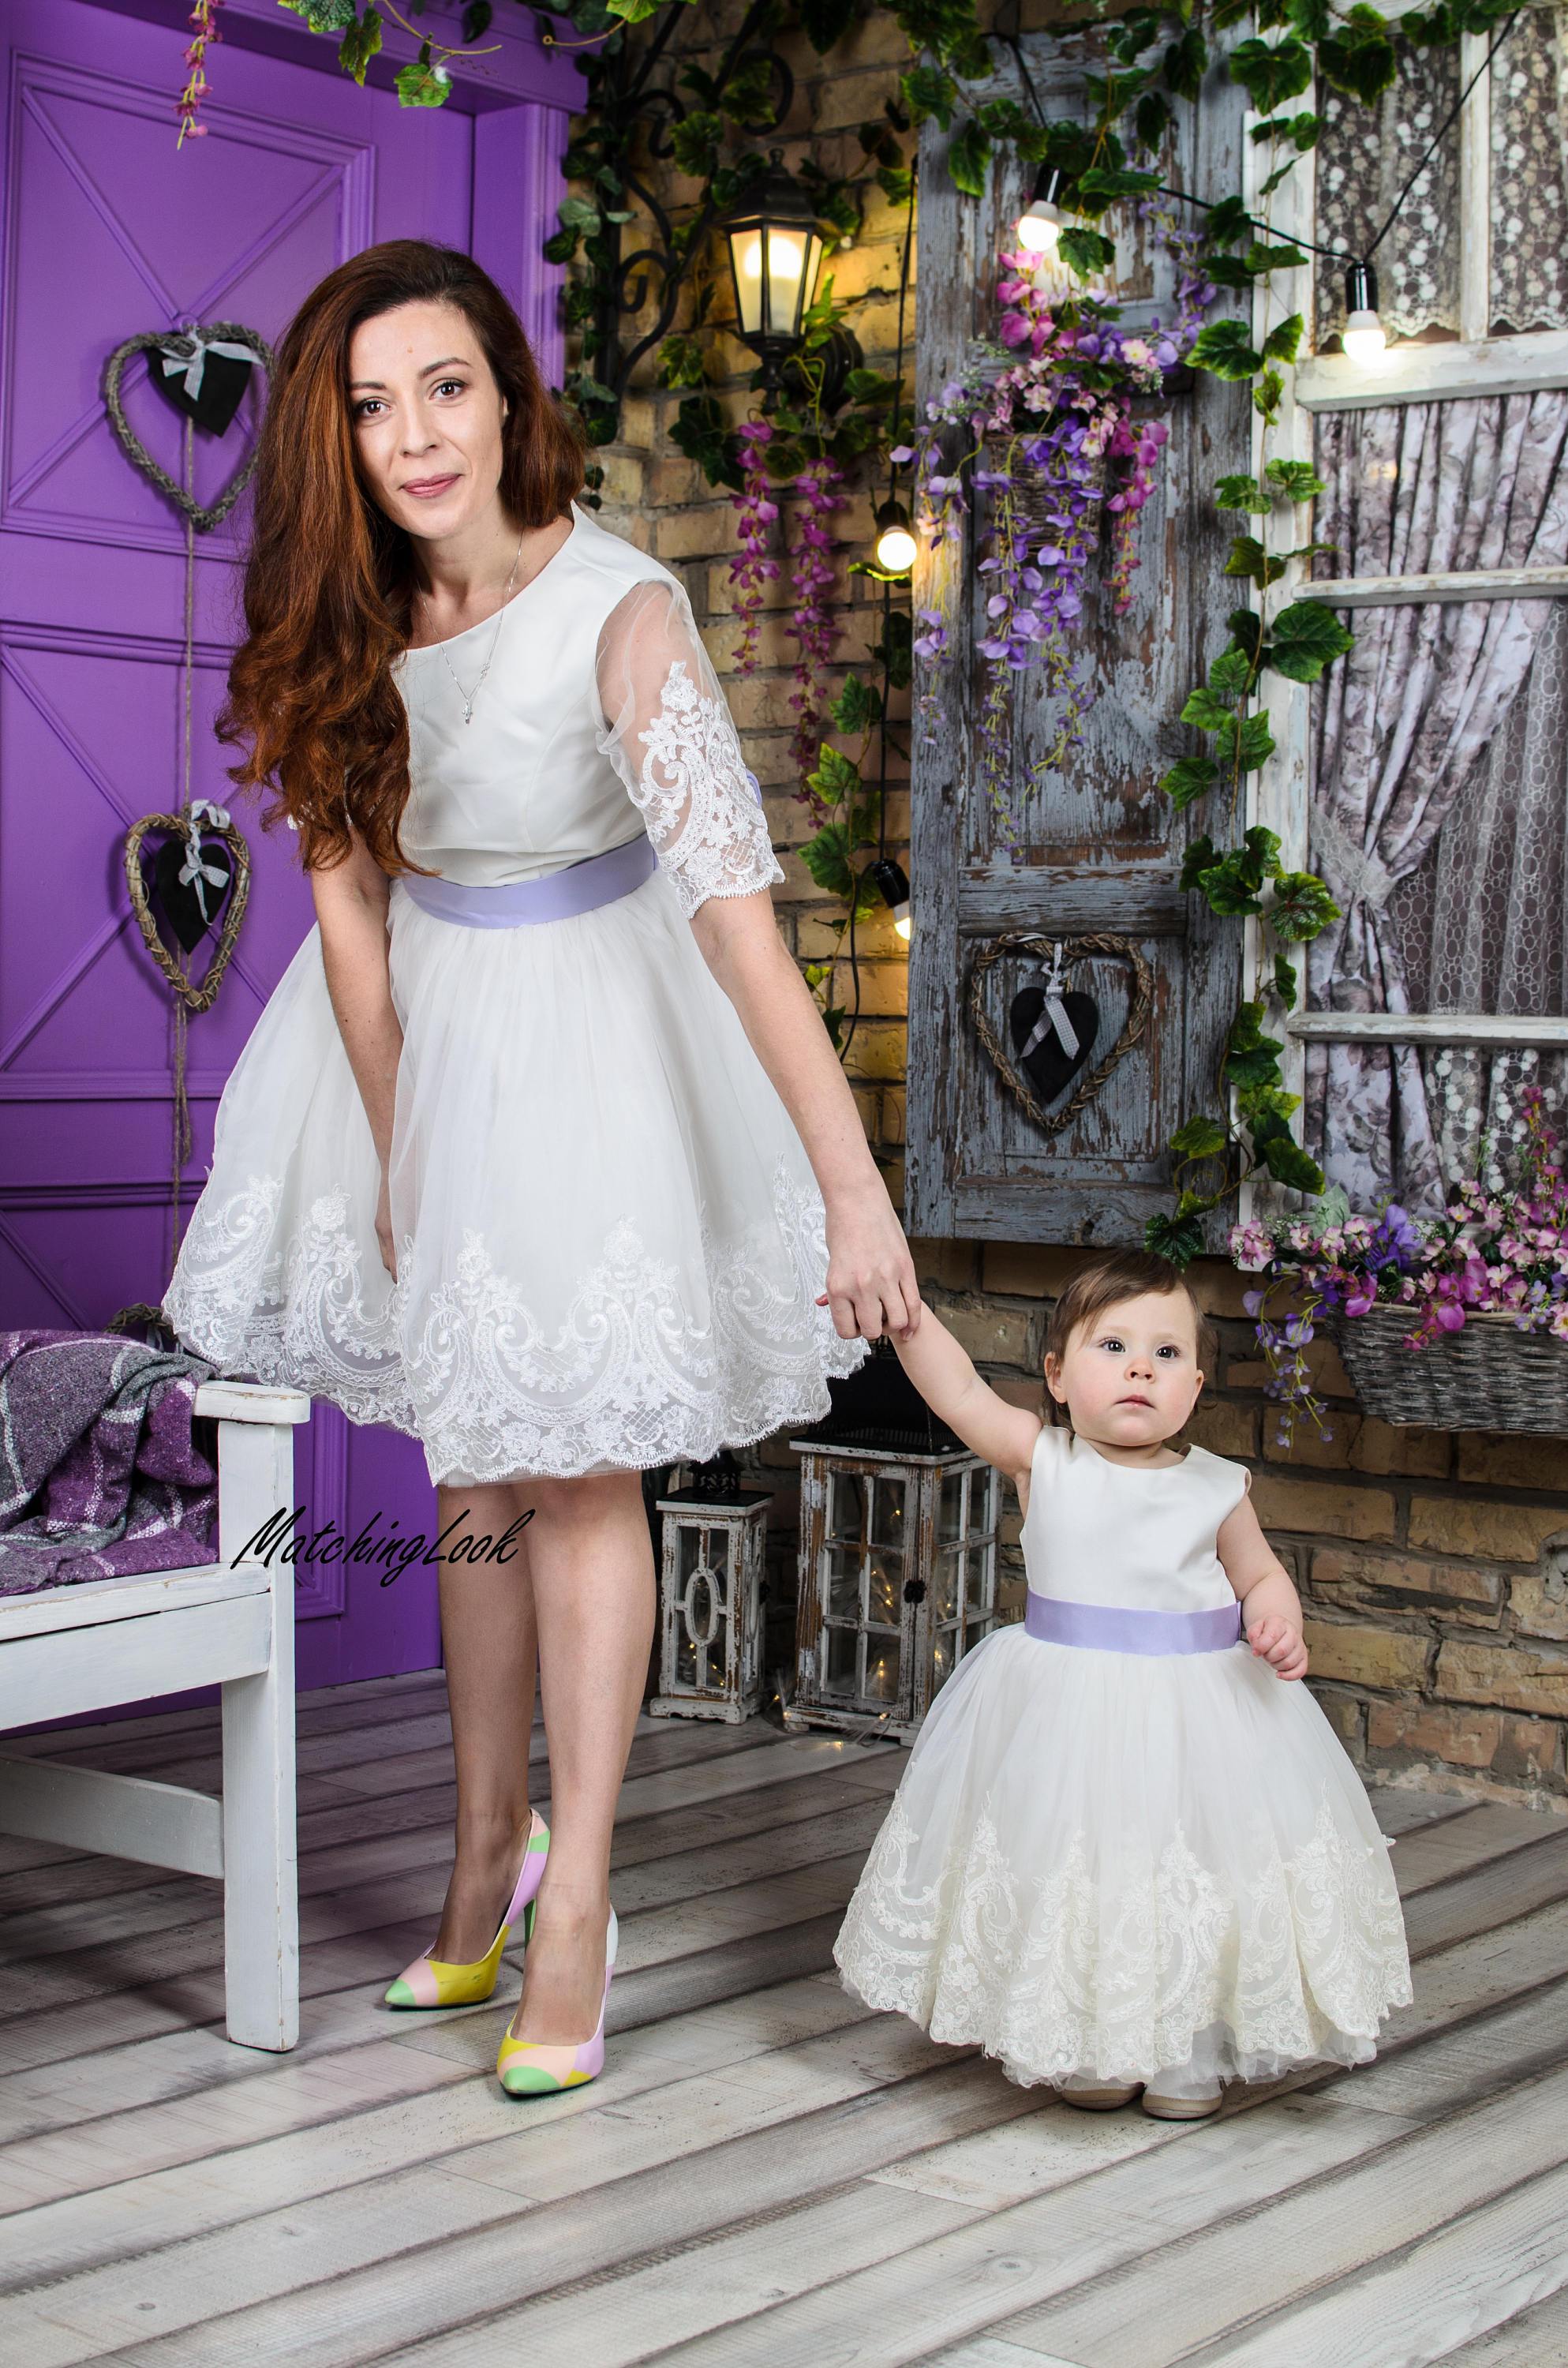 Buy Foreverkidz Organza Gown for Girls = LIGHT PINK for Girls (3-4Years)  Online in India, Shop at FirstCry.com - 13314292